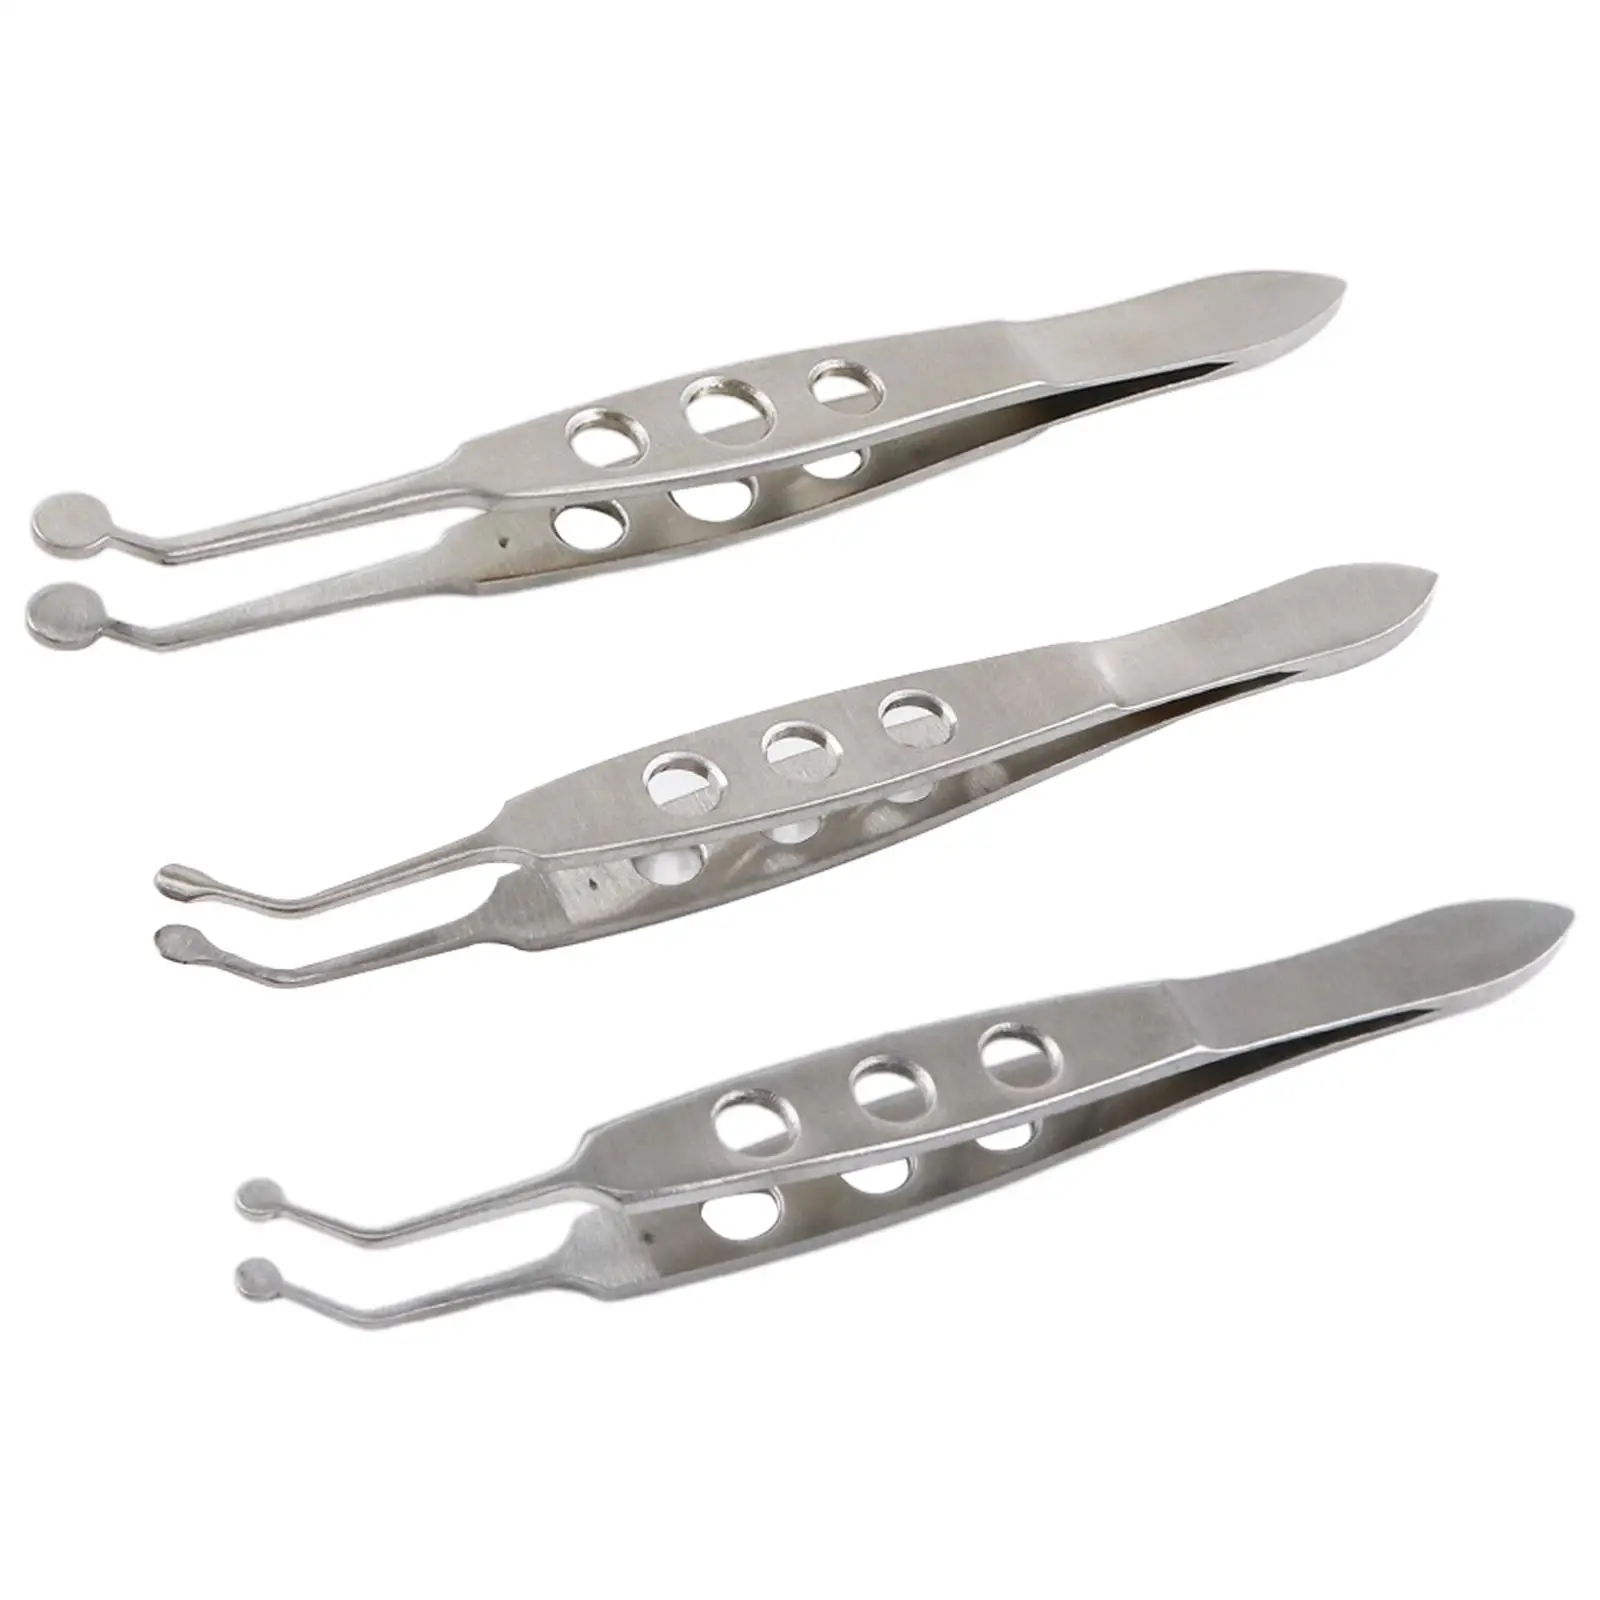 Meibomian Gland Forceps Ophthalmological Eye Tool High Precision Stainless Steel Tools Clip Clamp for Eyelid Meibomian Flap